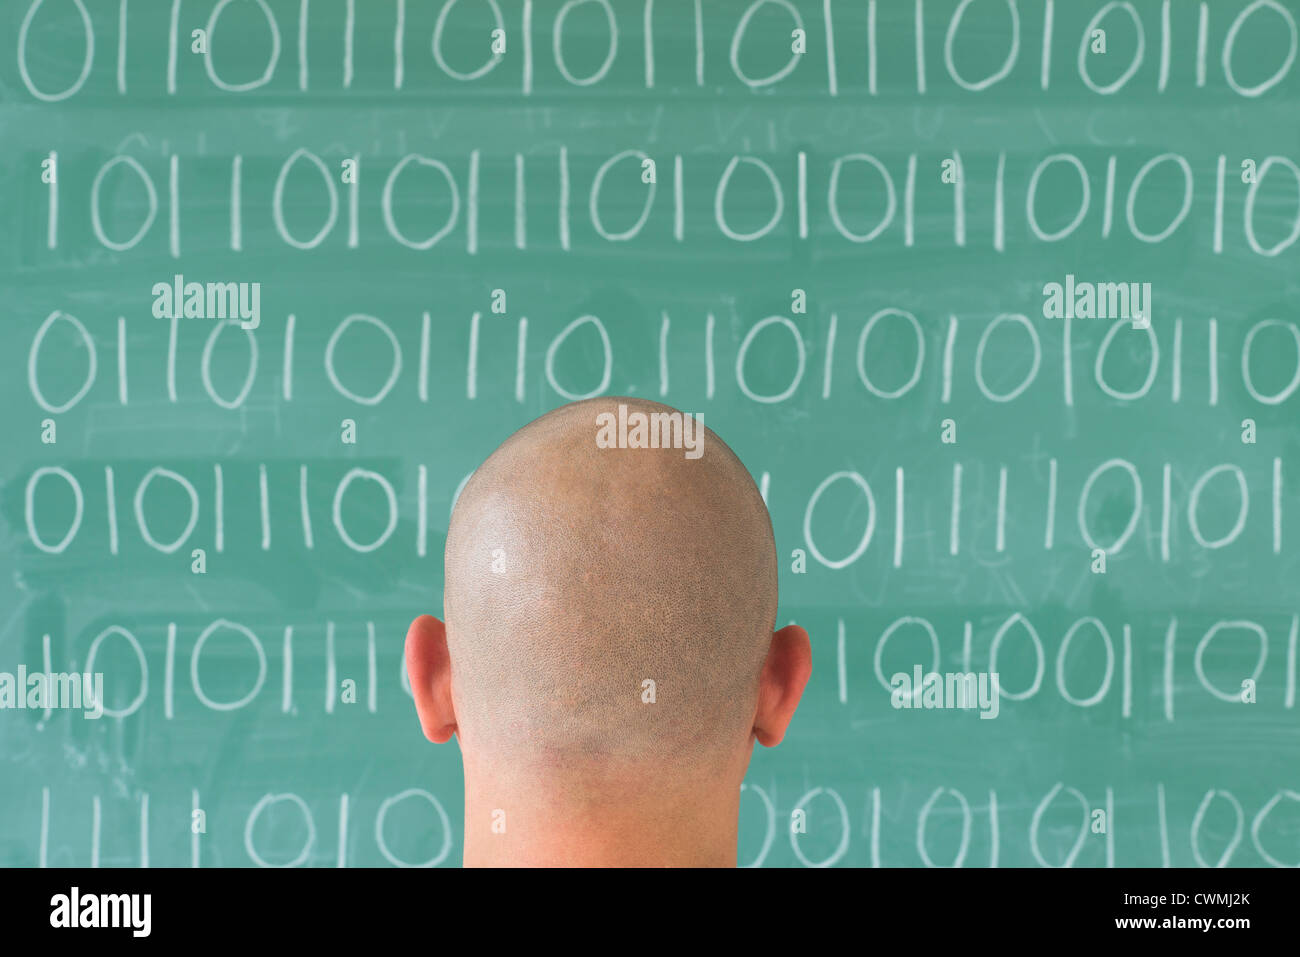 Man in front of blackboard with binary code Stock Photo